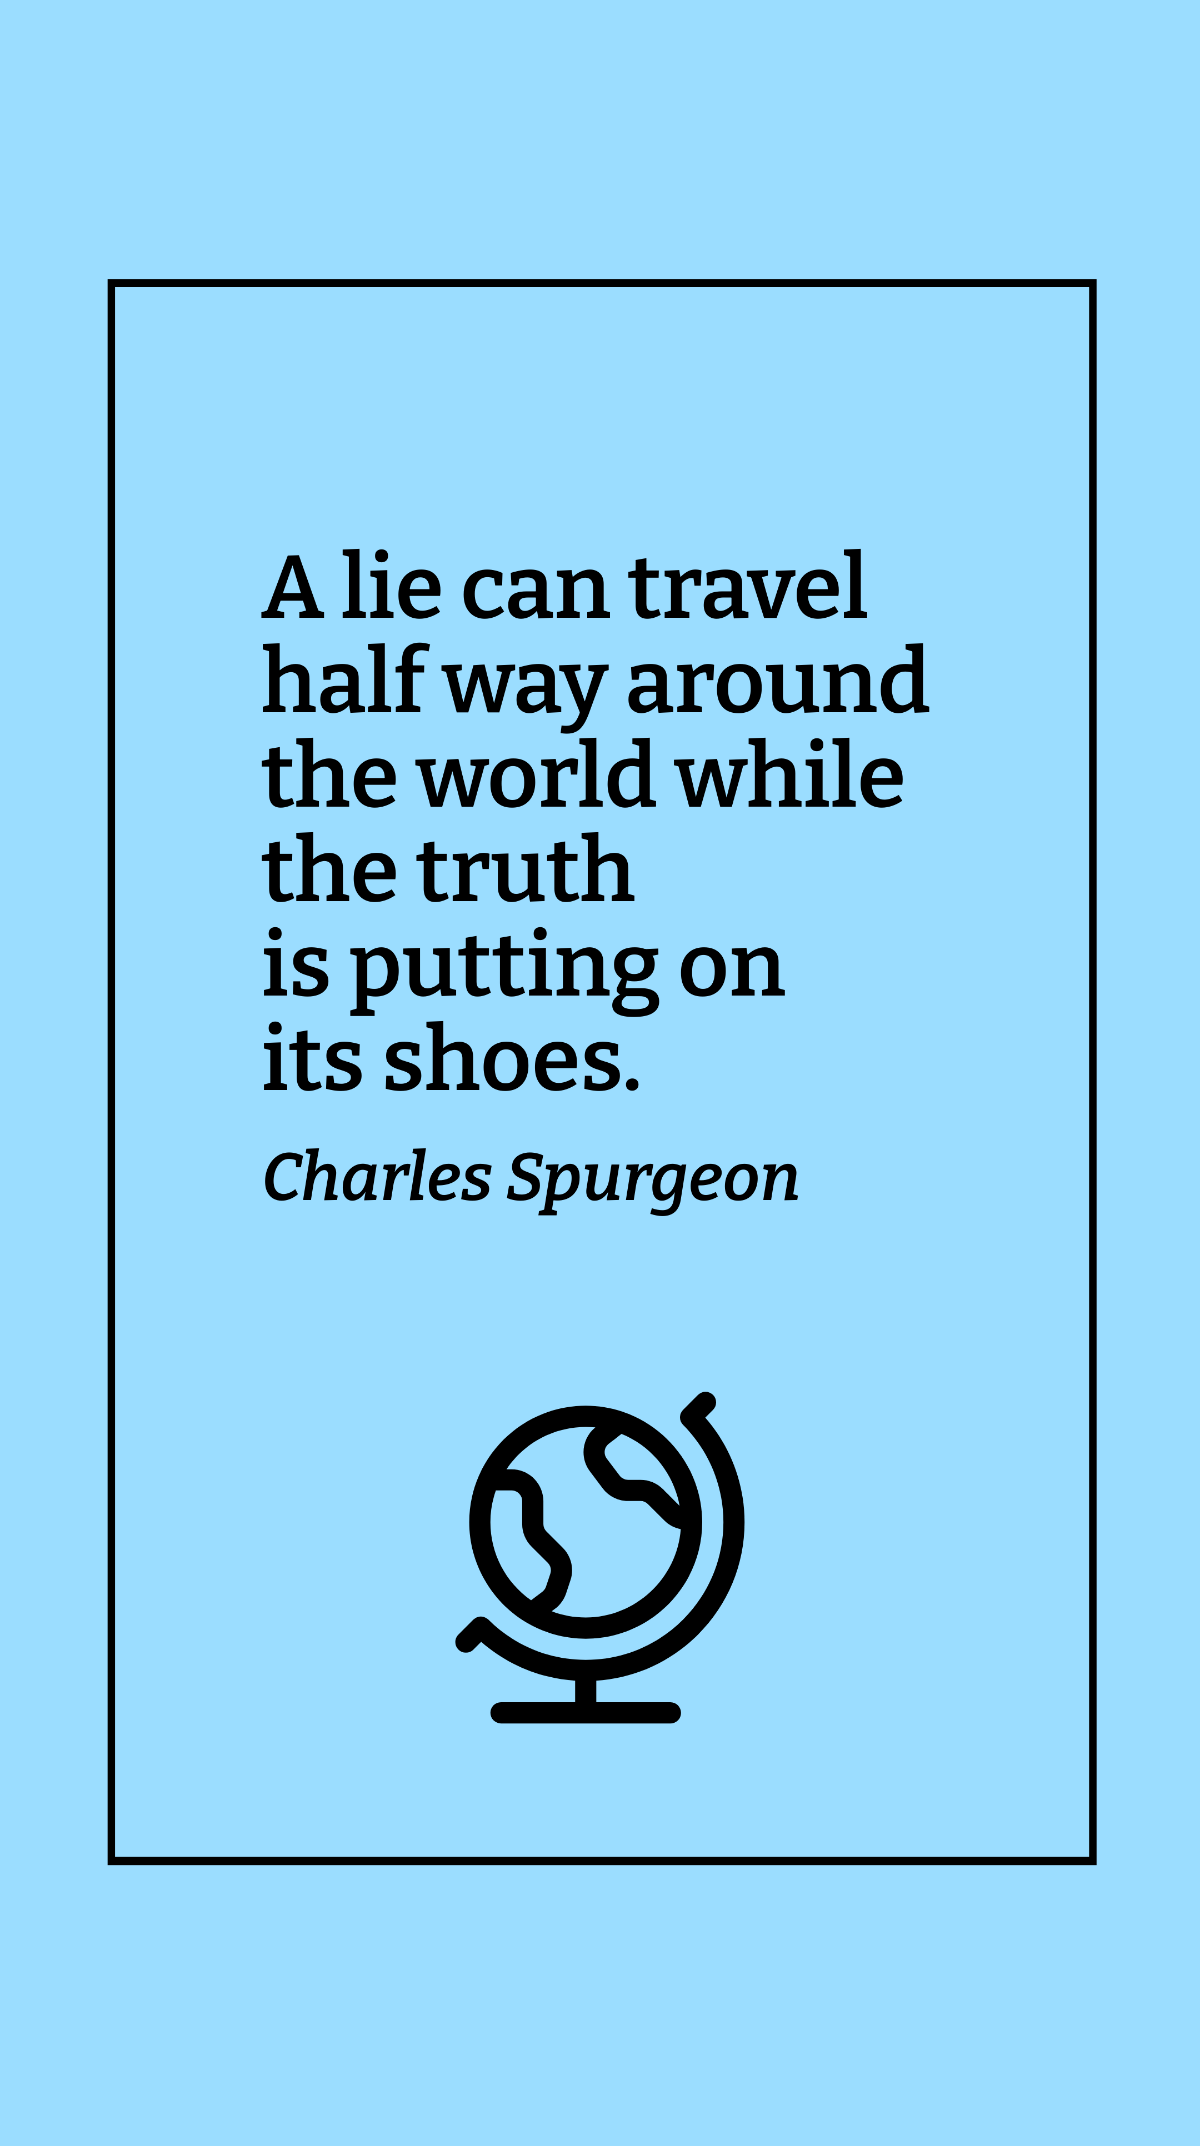 Free Charles Spurgeon - A lie can travel half way around the world while the truth is putting on its shoes. Template